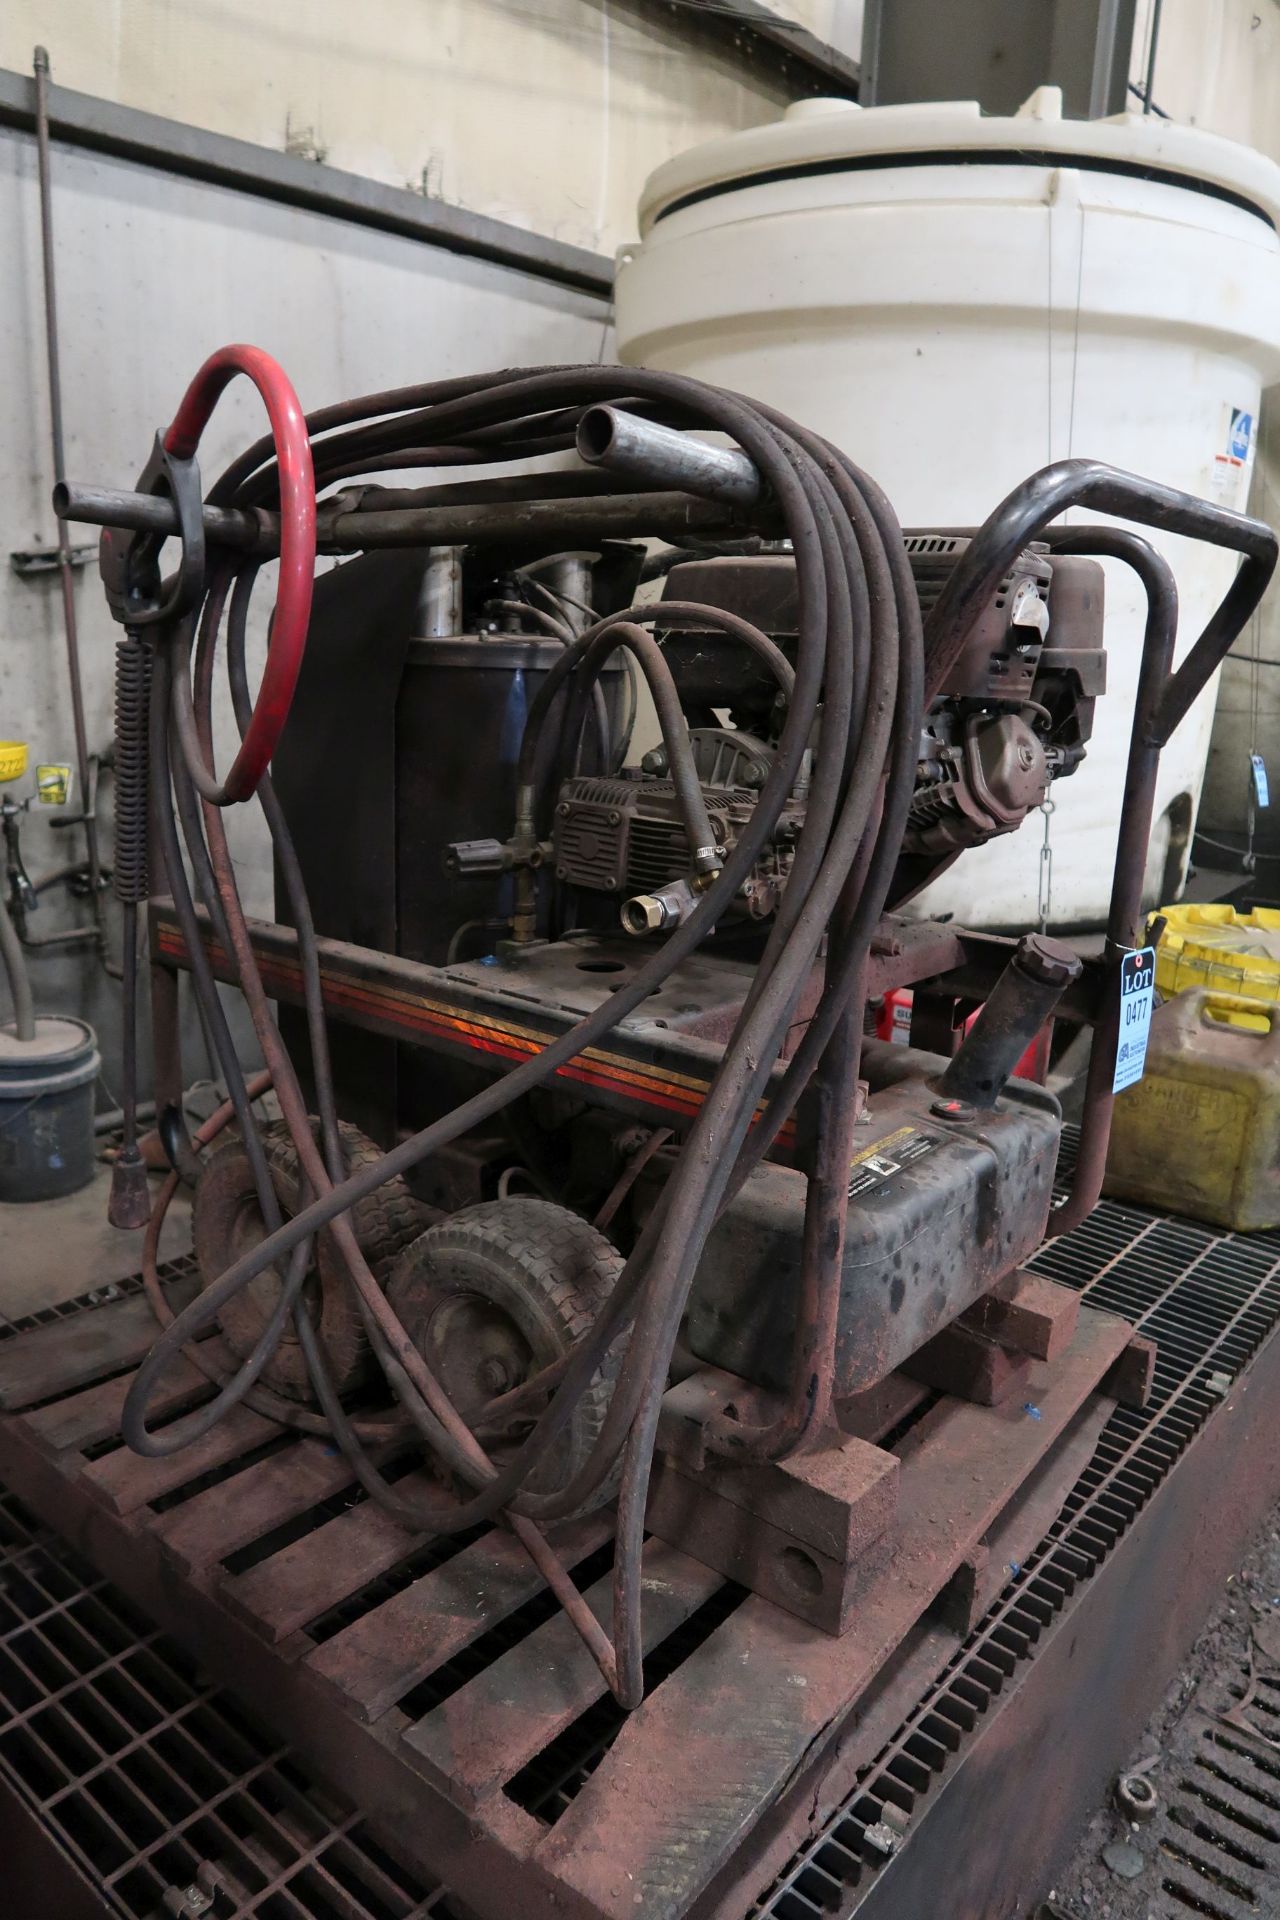 3,500 PSI FUEL OIL FIRED STEAM CLEANER **LOADING PRICE DUE TO ERRA - $50.00** - Image 2 of 3